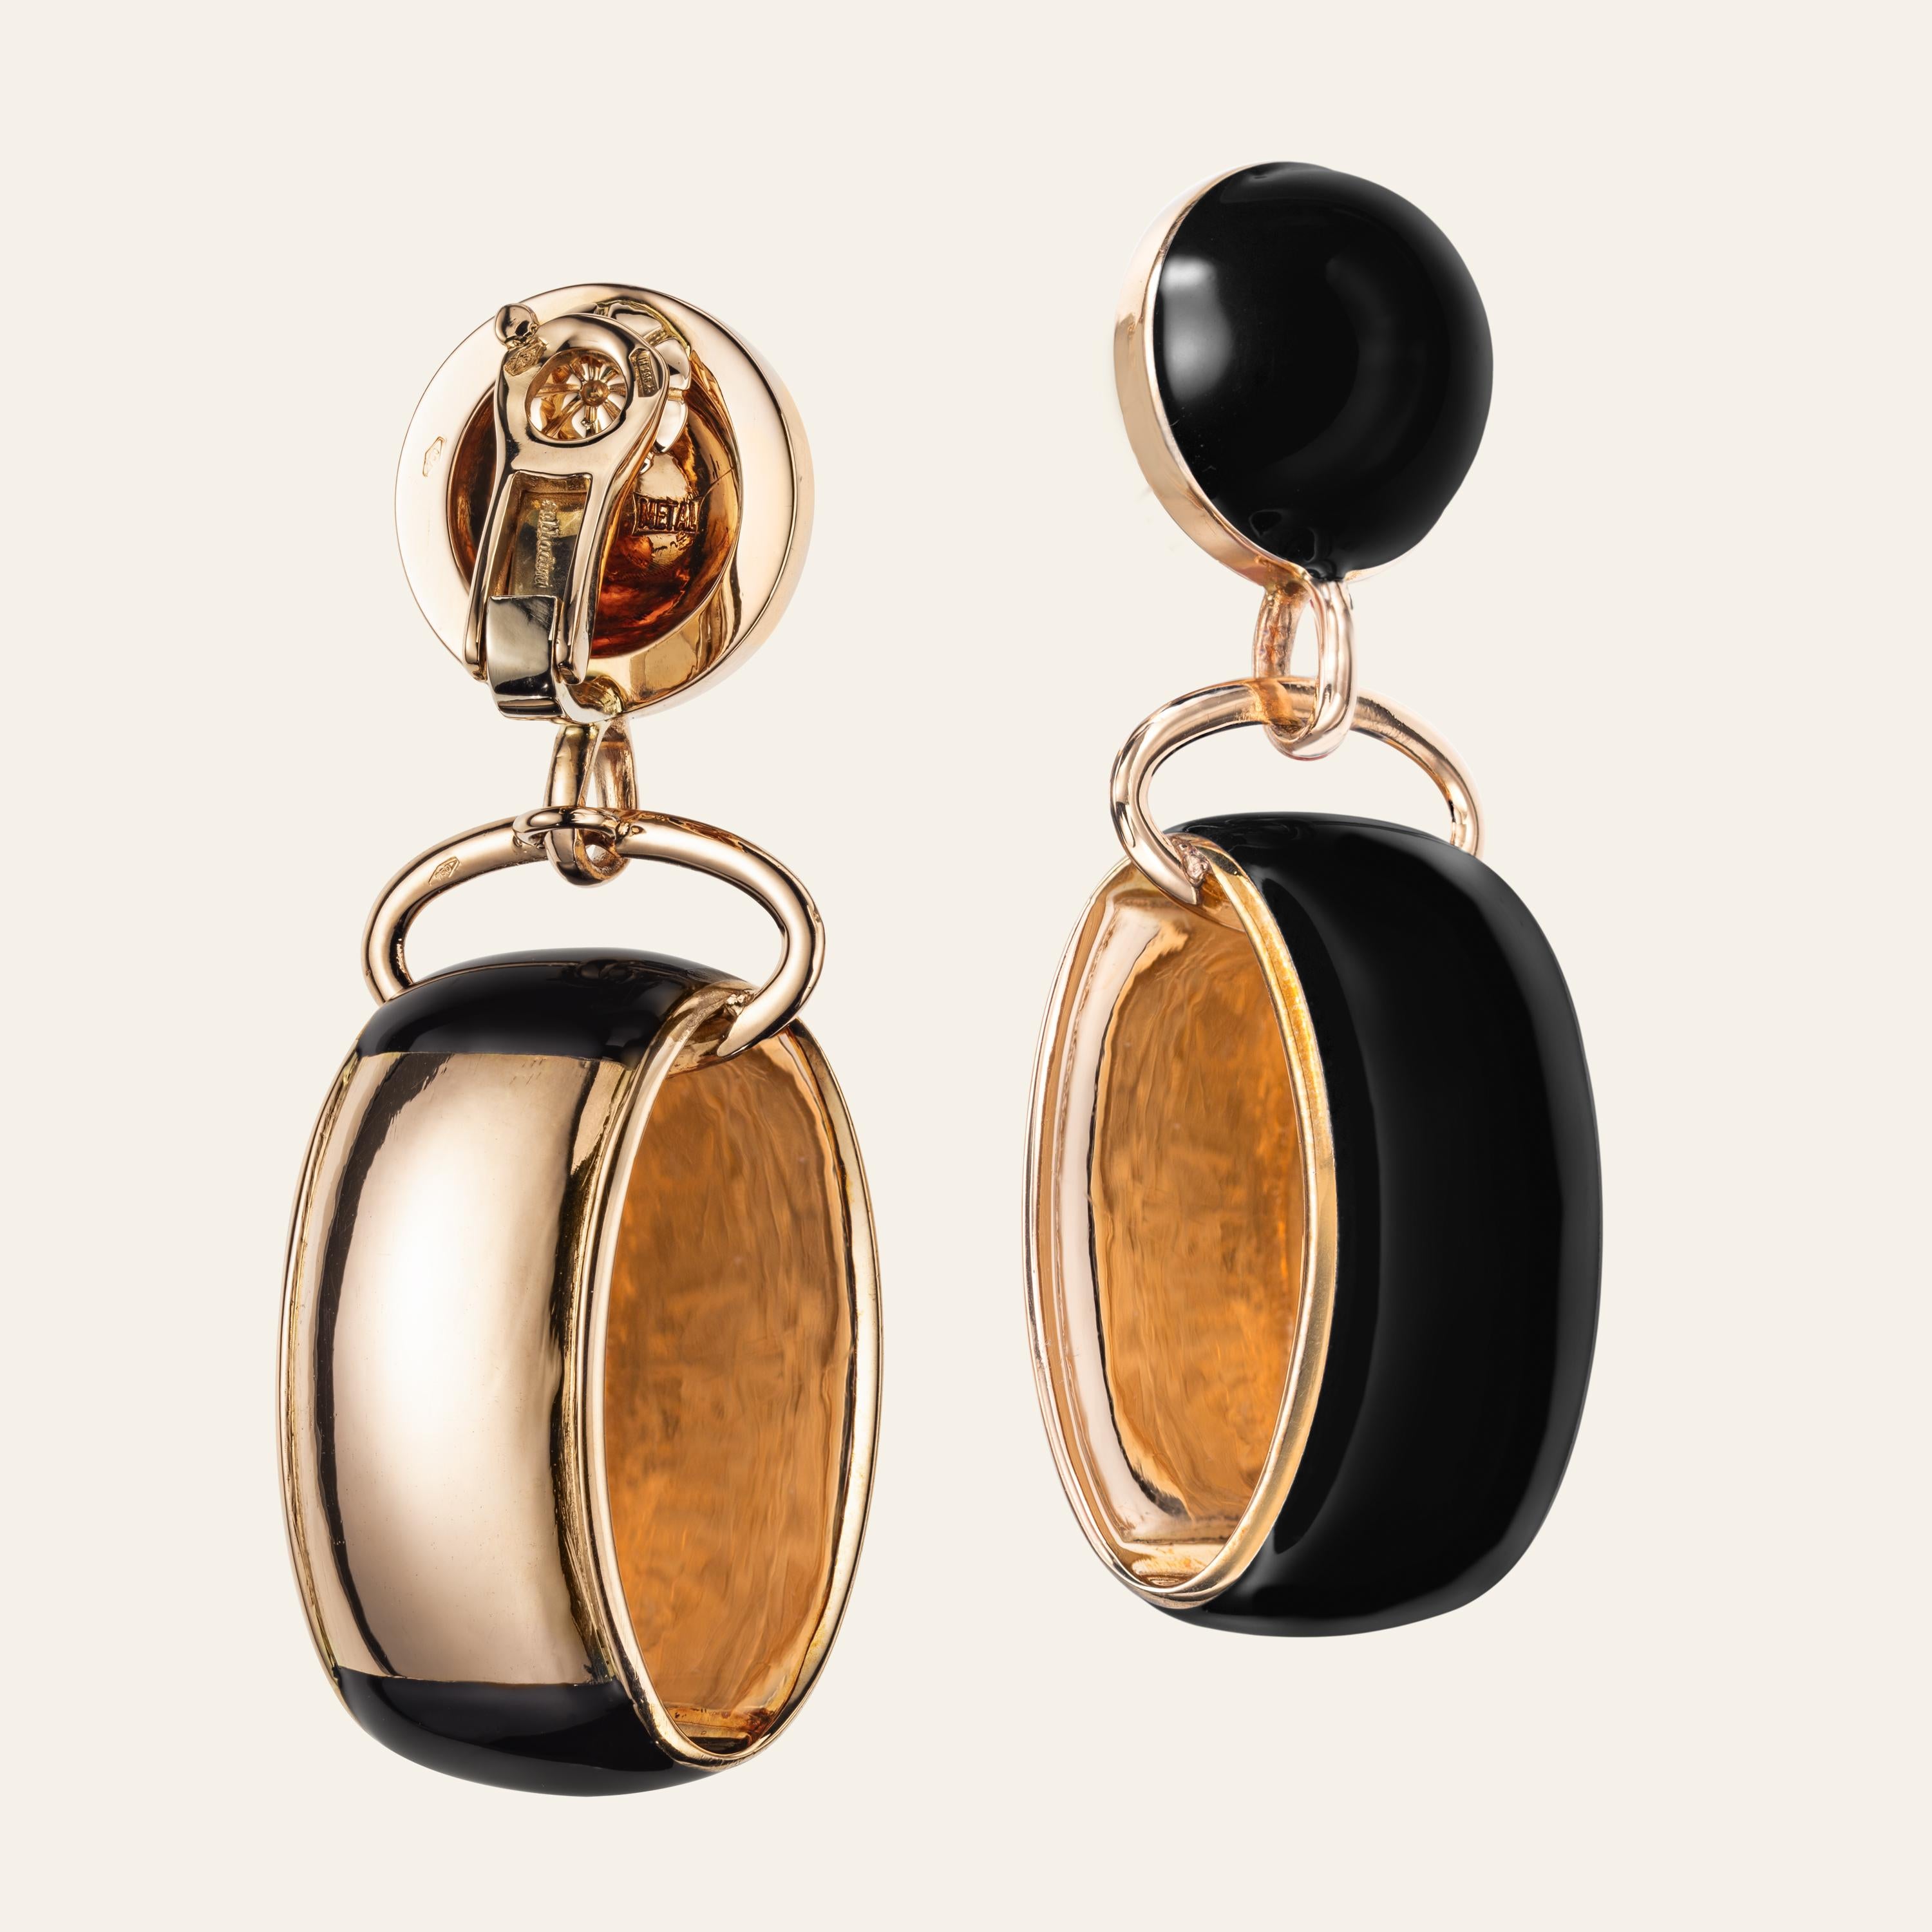 Sabbadini Pendant Earrings in Black Laquer & Pink Gold
18k Pink gold and bronze pendant earrings, black lacquer coat. Gold 20,90gr and bronze 18,80gr 
Hand made jewelry & designed in Milan, in Via Montenapoleone.
This item comes directly from the